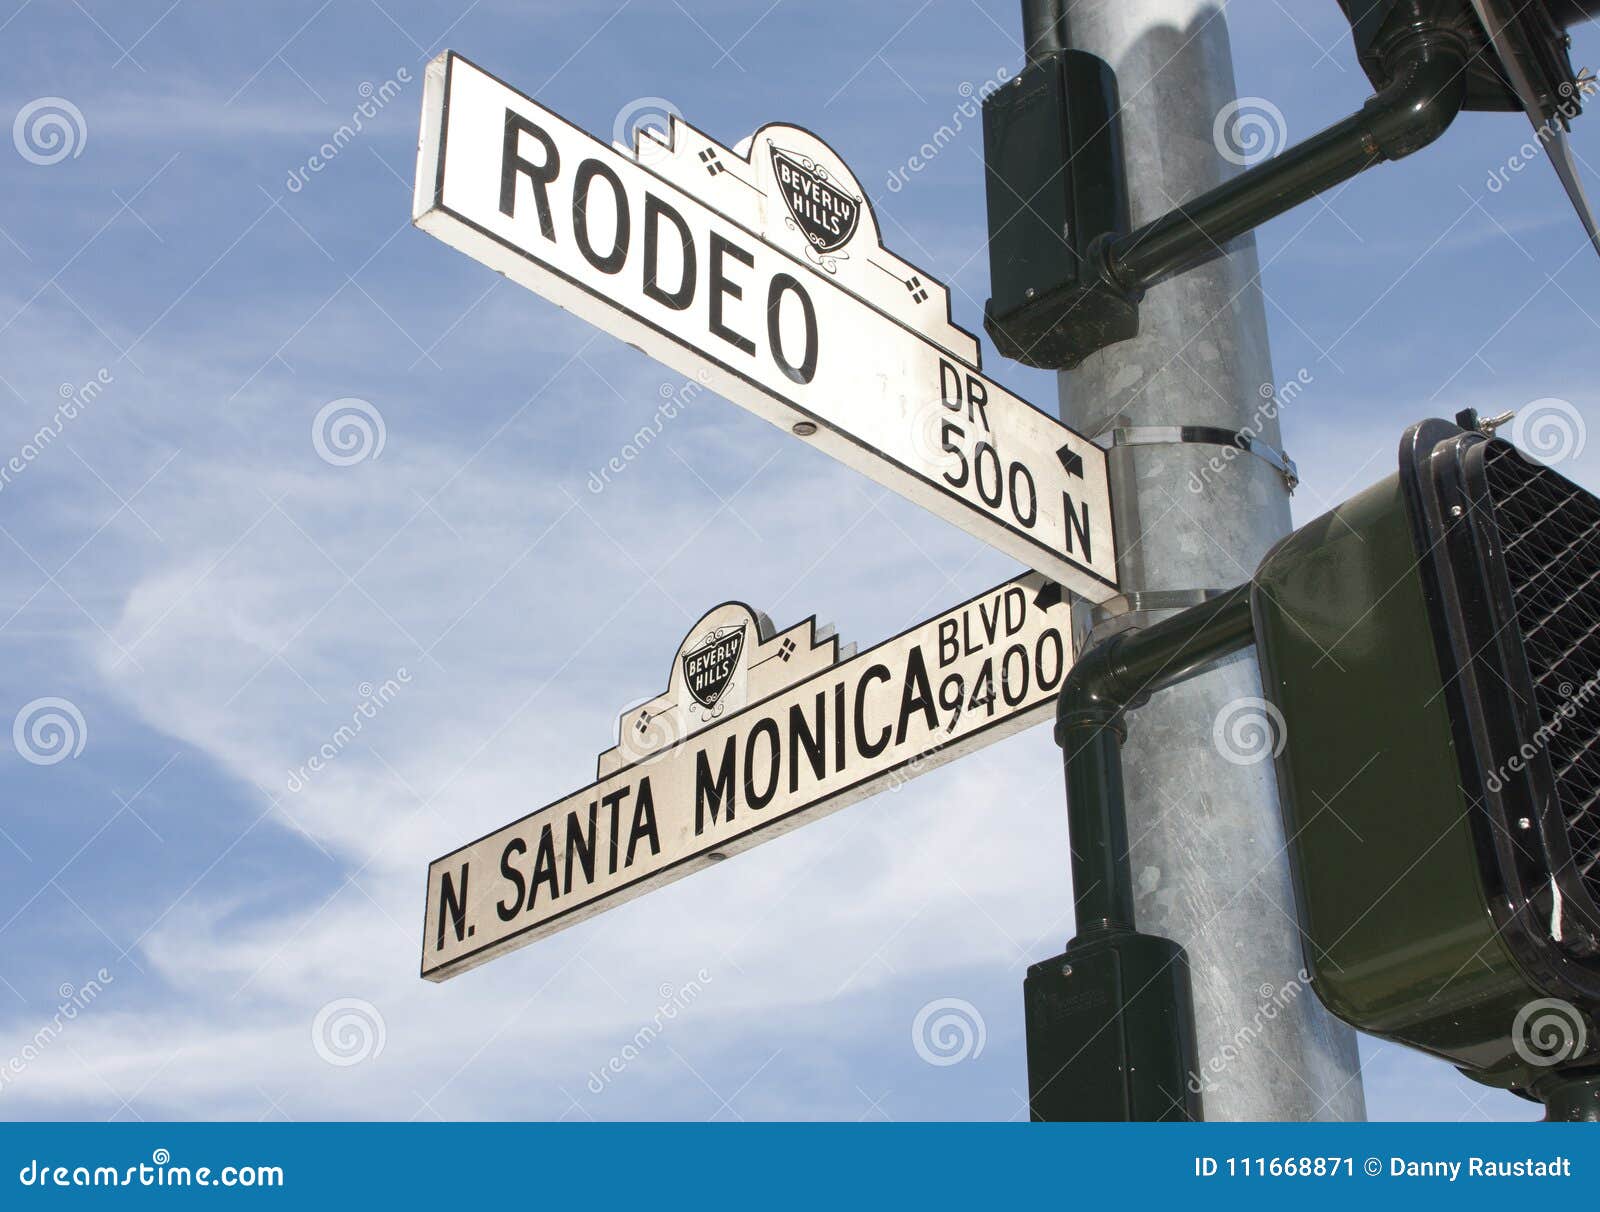 rodeo drive street sign in beverly hills, ca